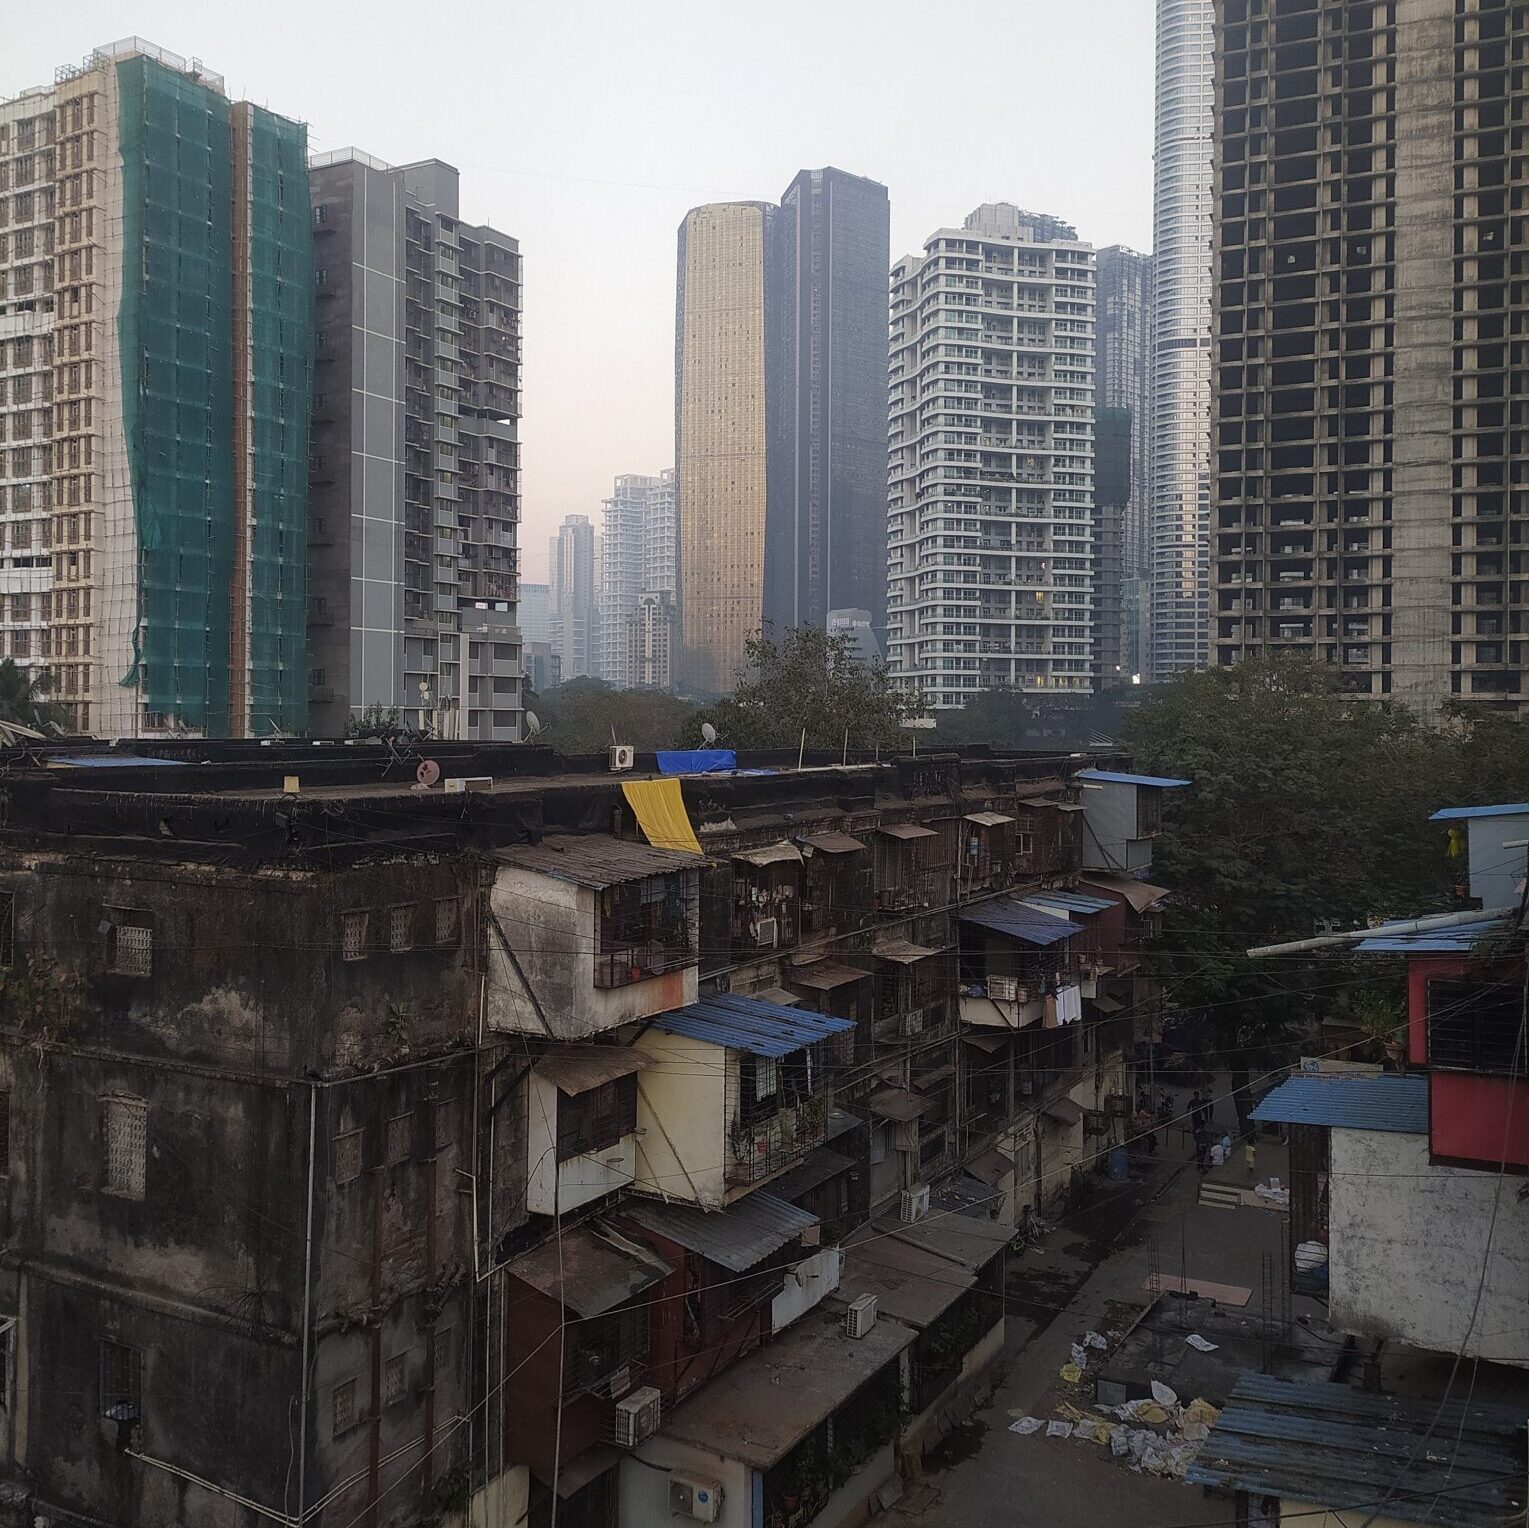 bdd chawls on the backdrop of sky scrapers 